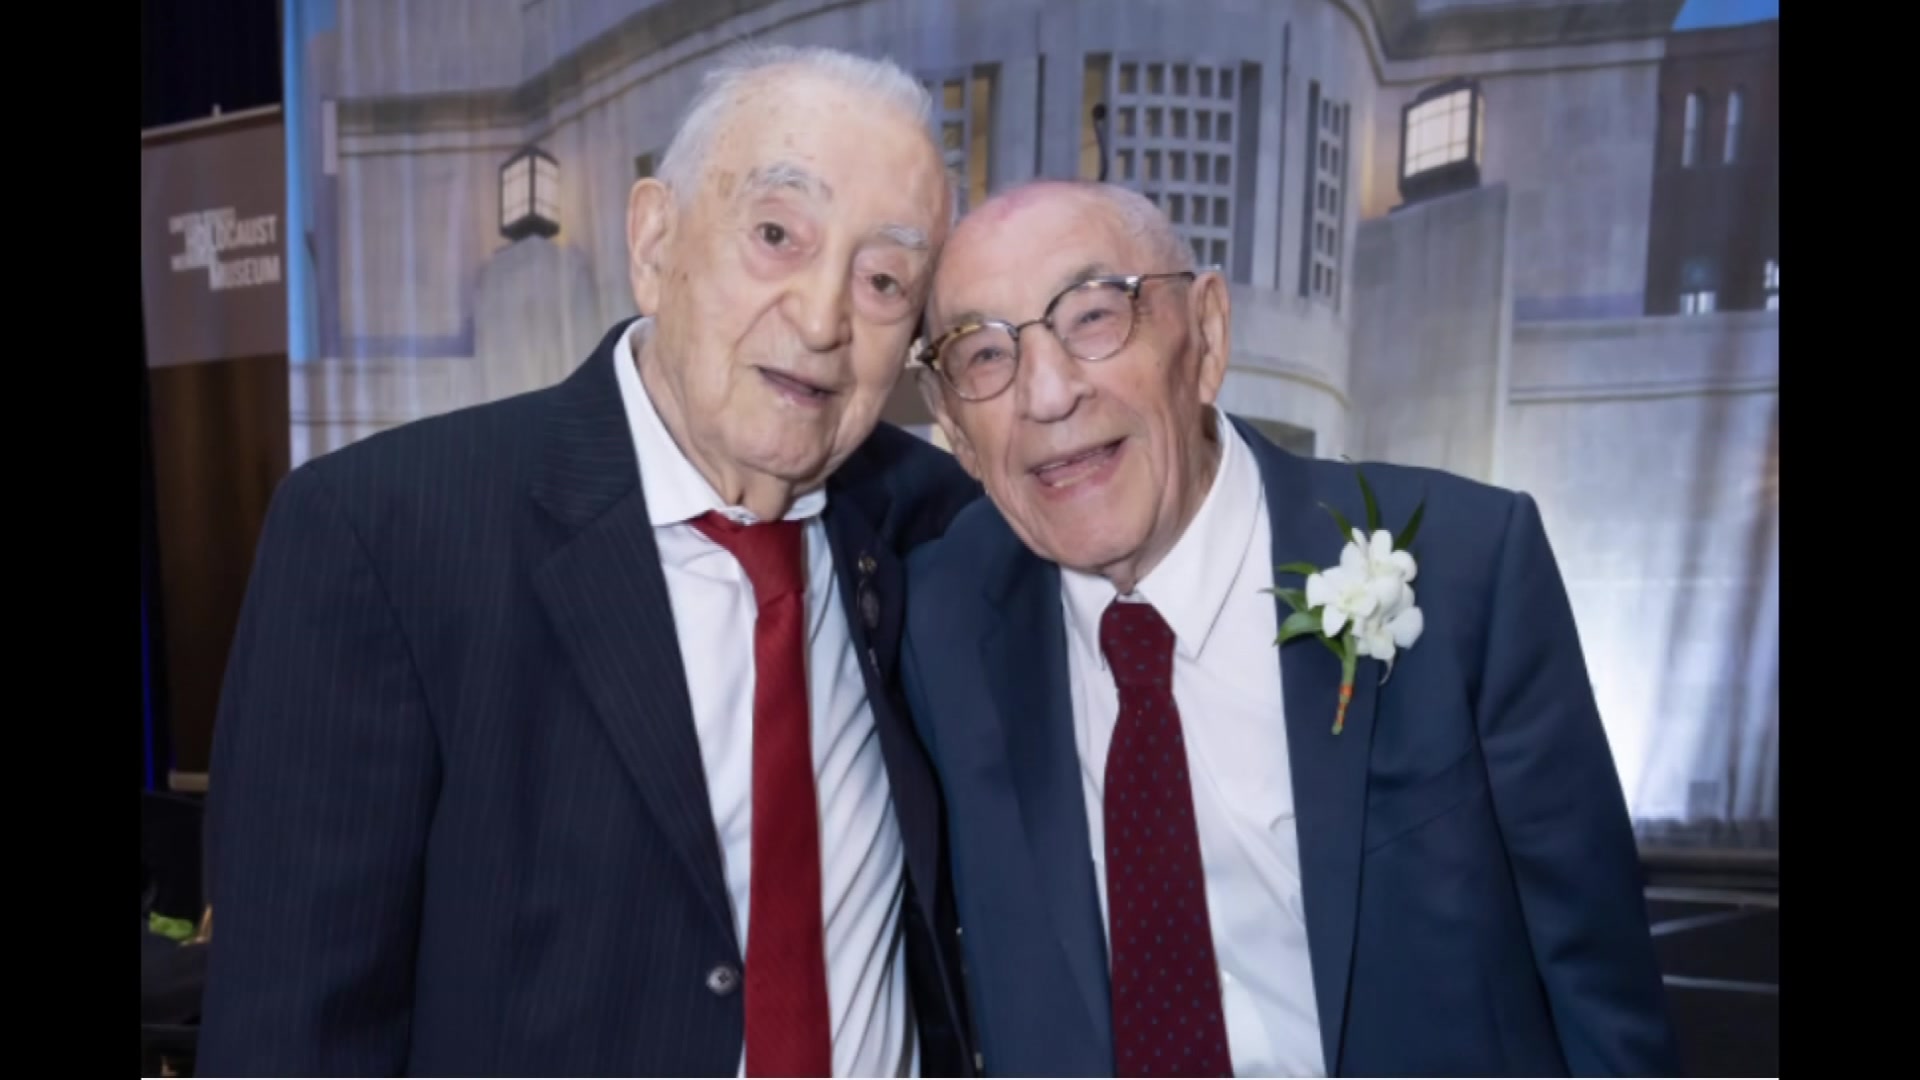 Holocaust Survivors, Once Imprisoned Together, Reunited 80 Years Later: ‘It Was Like He Was My Brother’